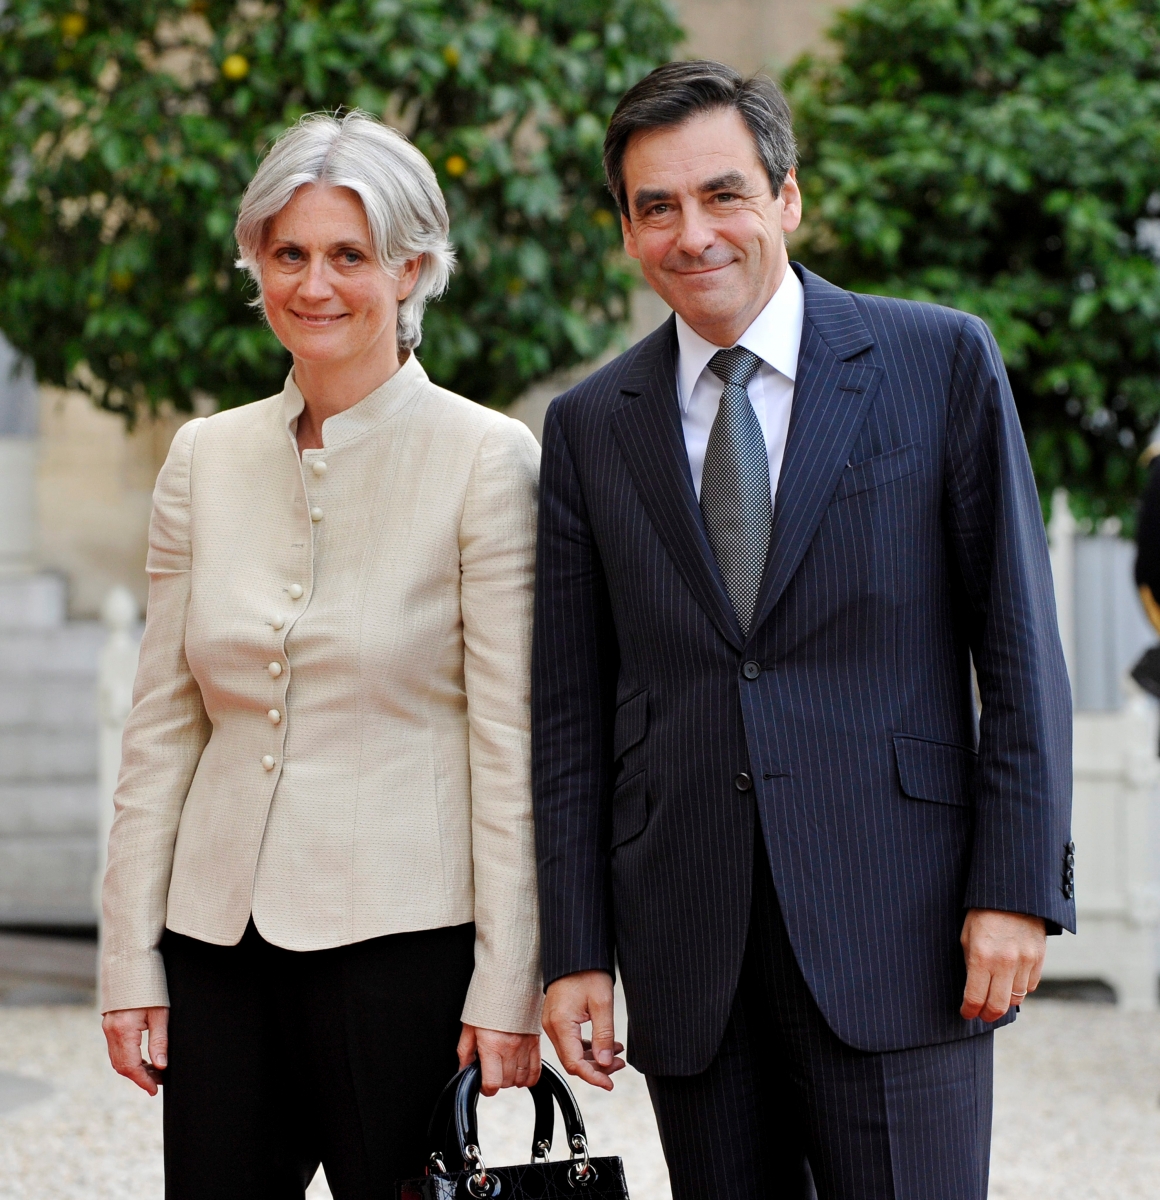 epa05748679 (FILE) - A file photo dated 13 June 2008 showing then French premier Francois Fillon and his wife Penelope Clarke arrive to participate in the working dinner at Elysee Palace, in Paris, France. French and international media reports on 25 January 2017 state French Republican party presidential election candidate Francois Fillon has become under pressure to explain the previous employment of his wife as parliamentary aide while he was a MP and to give details of the work she did. French MPs are allowed to employ family members as aides.  EPA/HORACIO VILLALOBOS (FILE) FRANCE PEOPLE FILLON